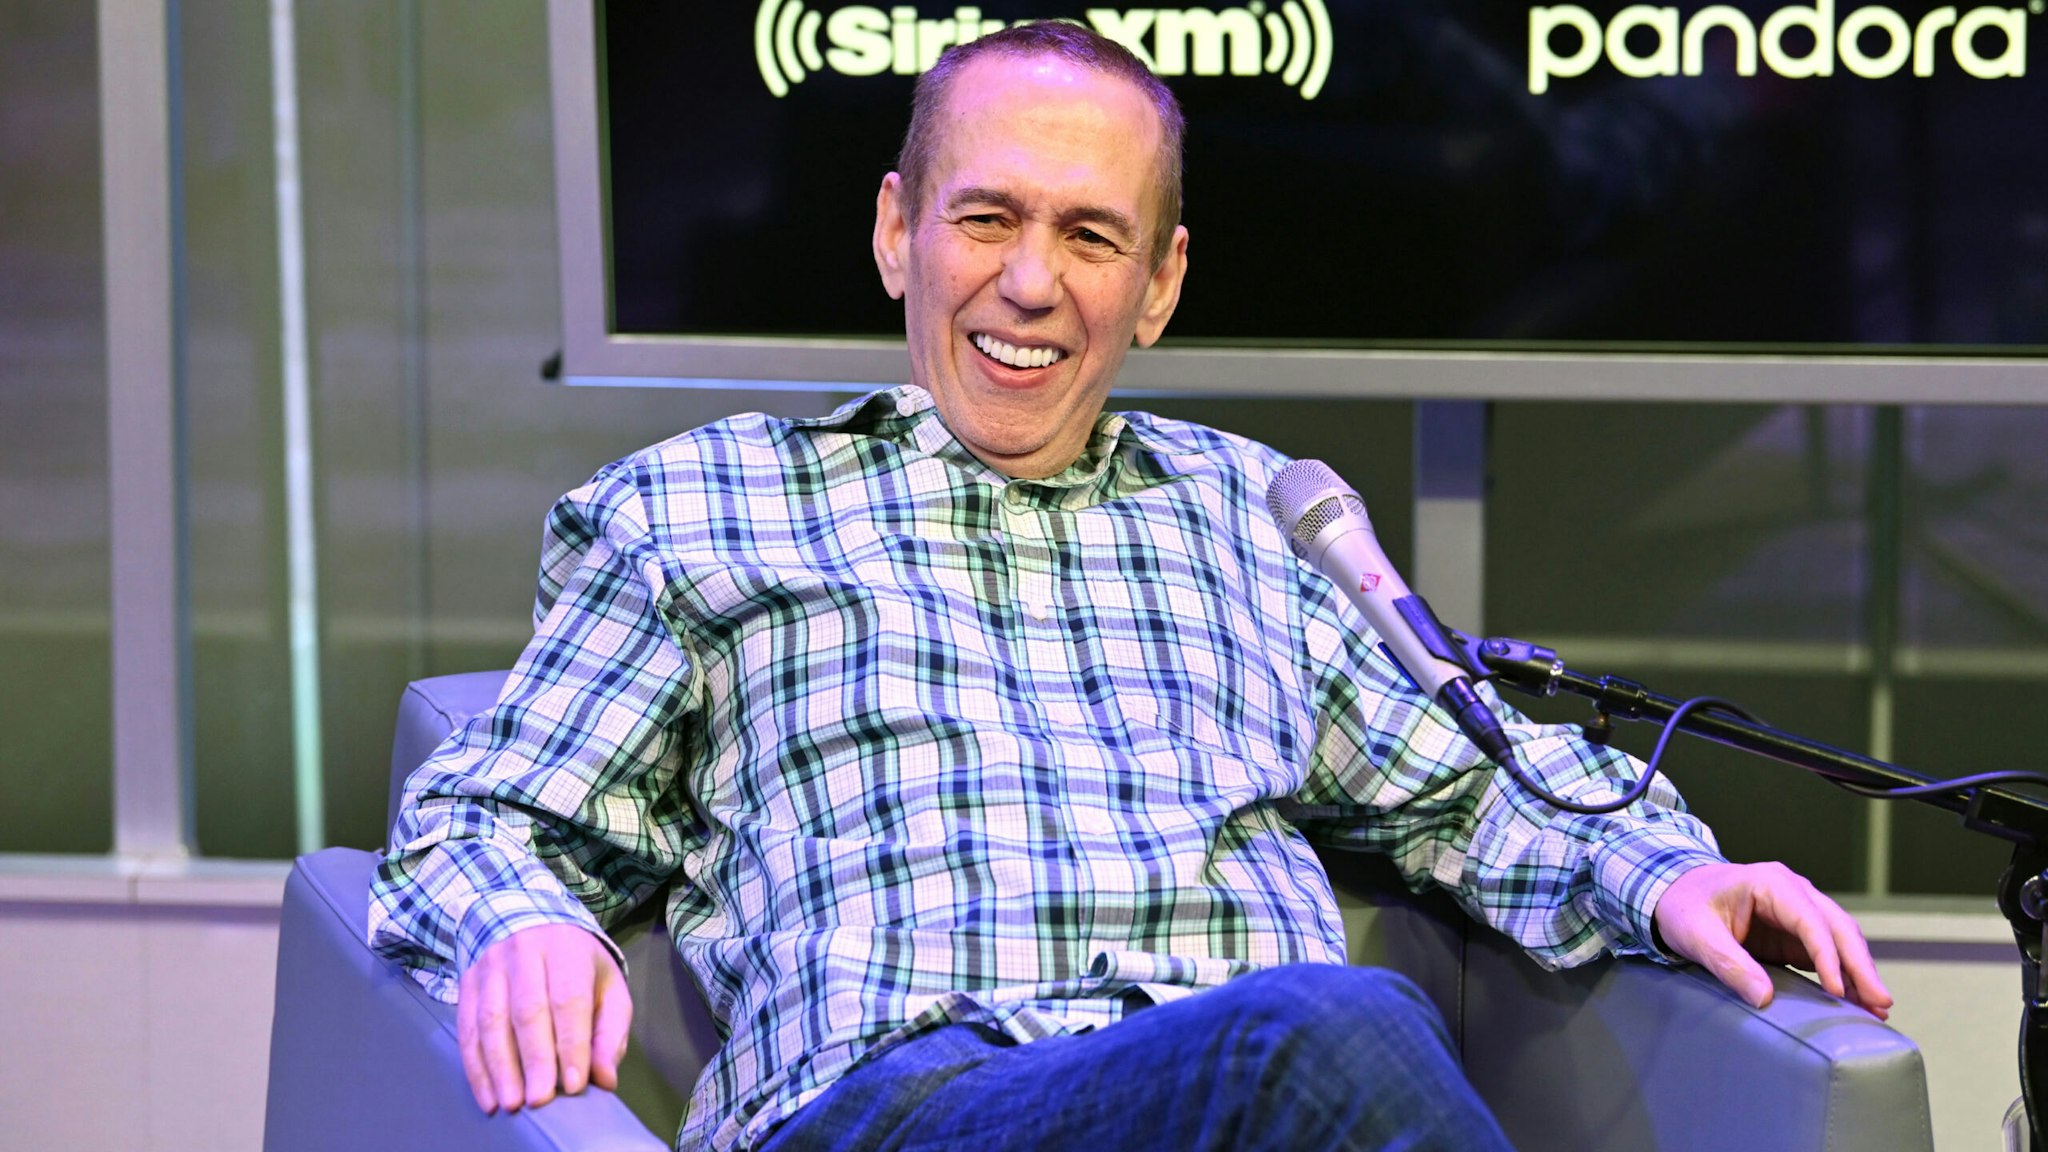 NEW YORK, NEW YORK - FEBRUARY 03: (EXCLUSIVE COVERAGE) Gilbert Gottfried hosts "Amazing Colossal Show" on Comedy Greats at SiriusXM Studios on February 03, 2020 in New York City.